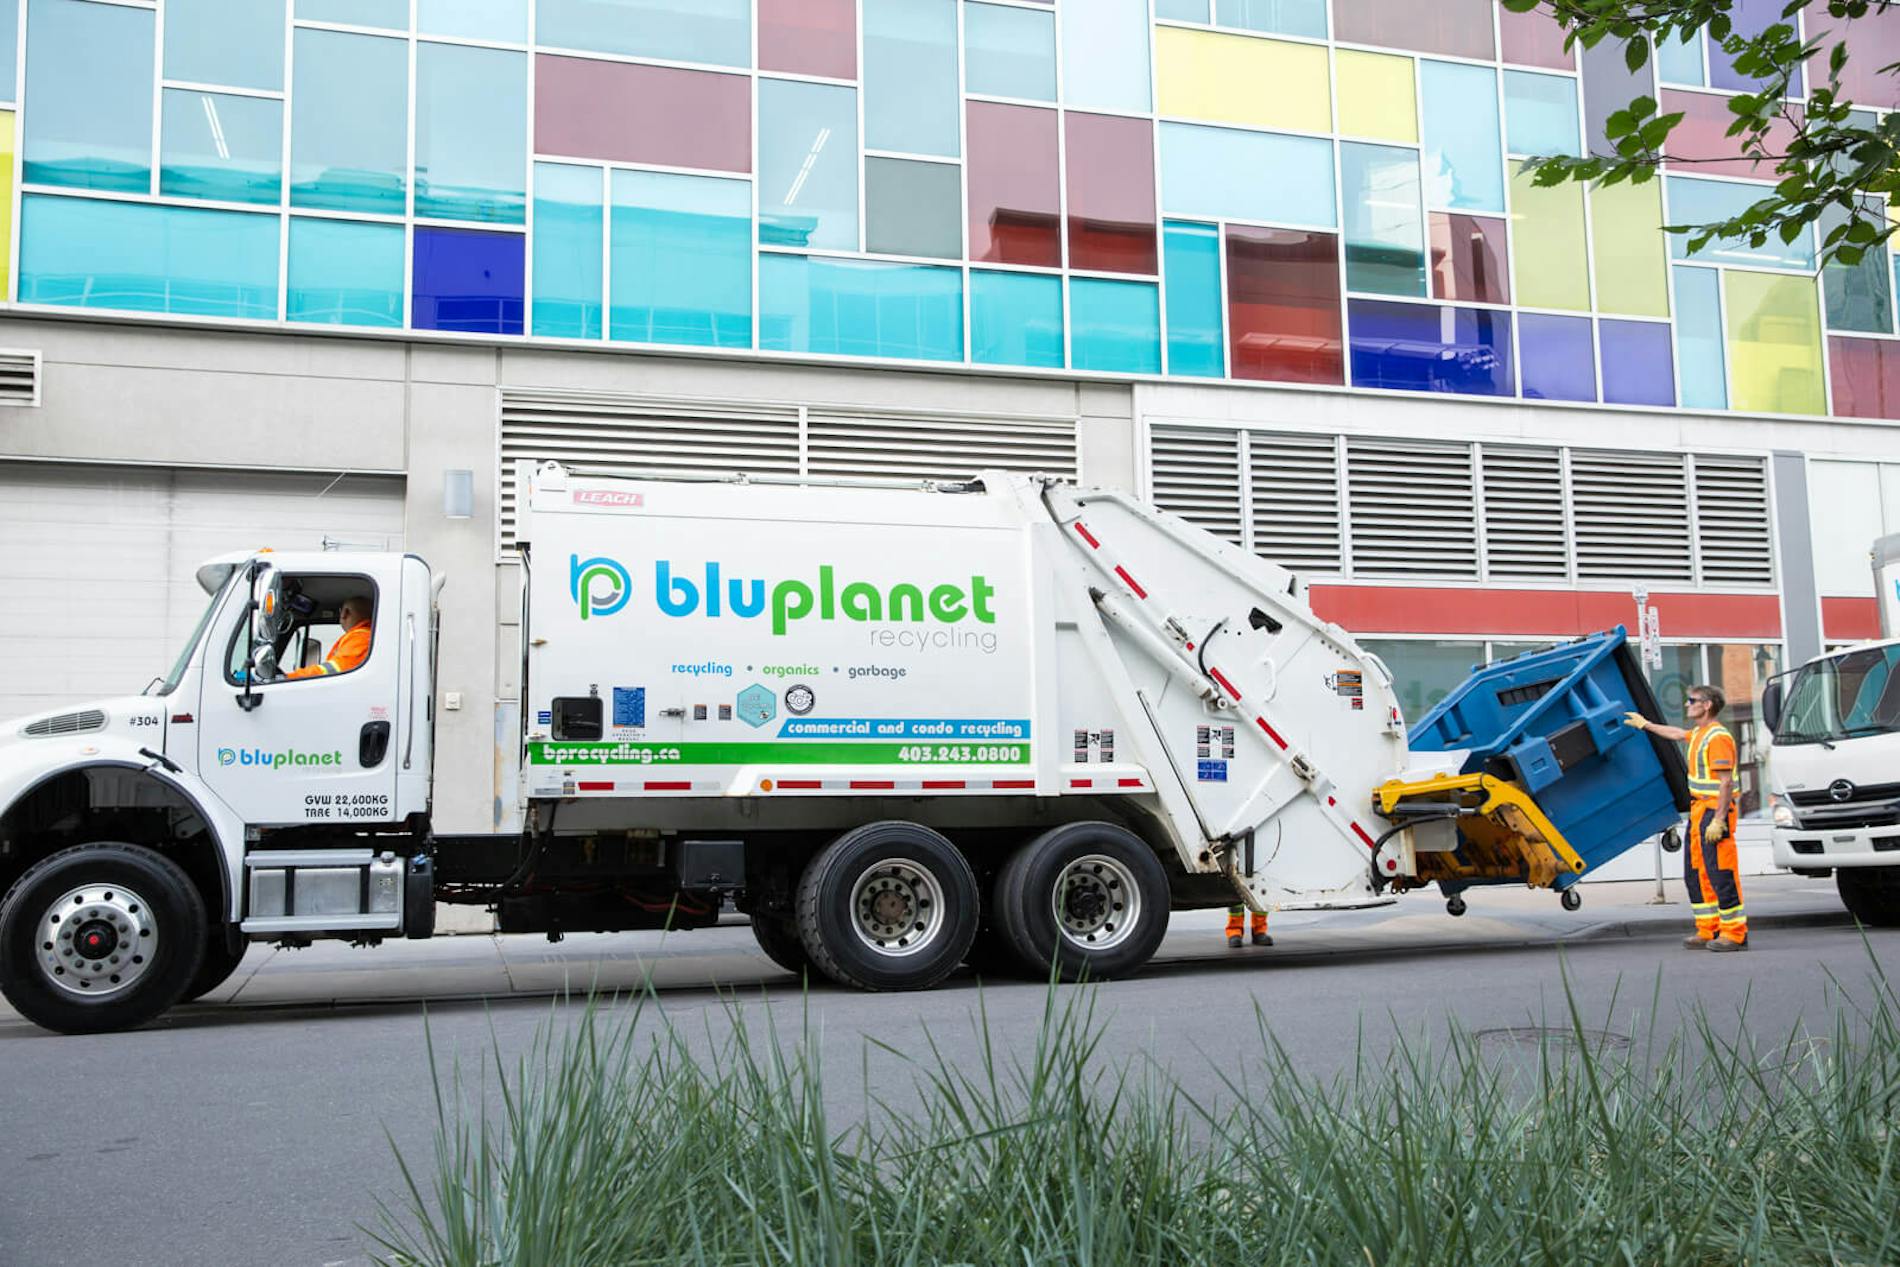 BluPlanet Recycling | waste disposal services and garbage collection near me